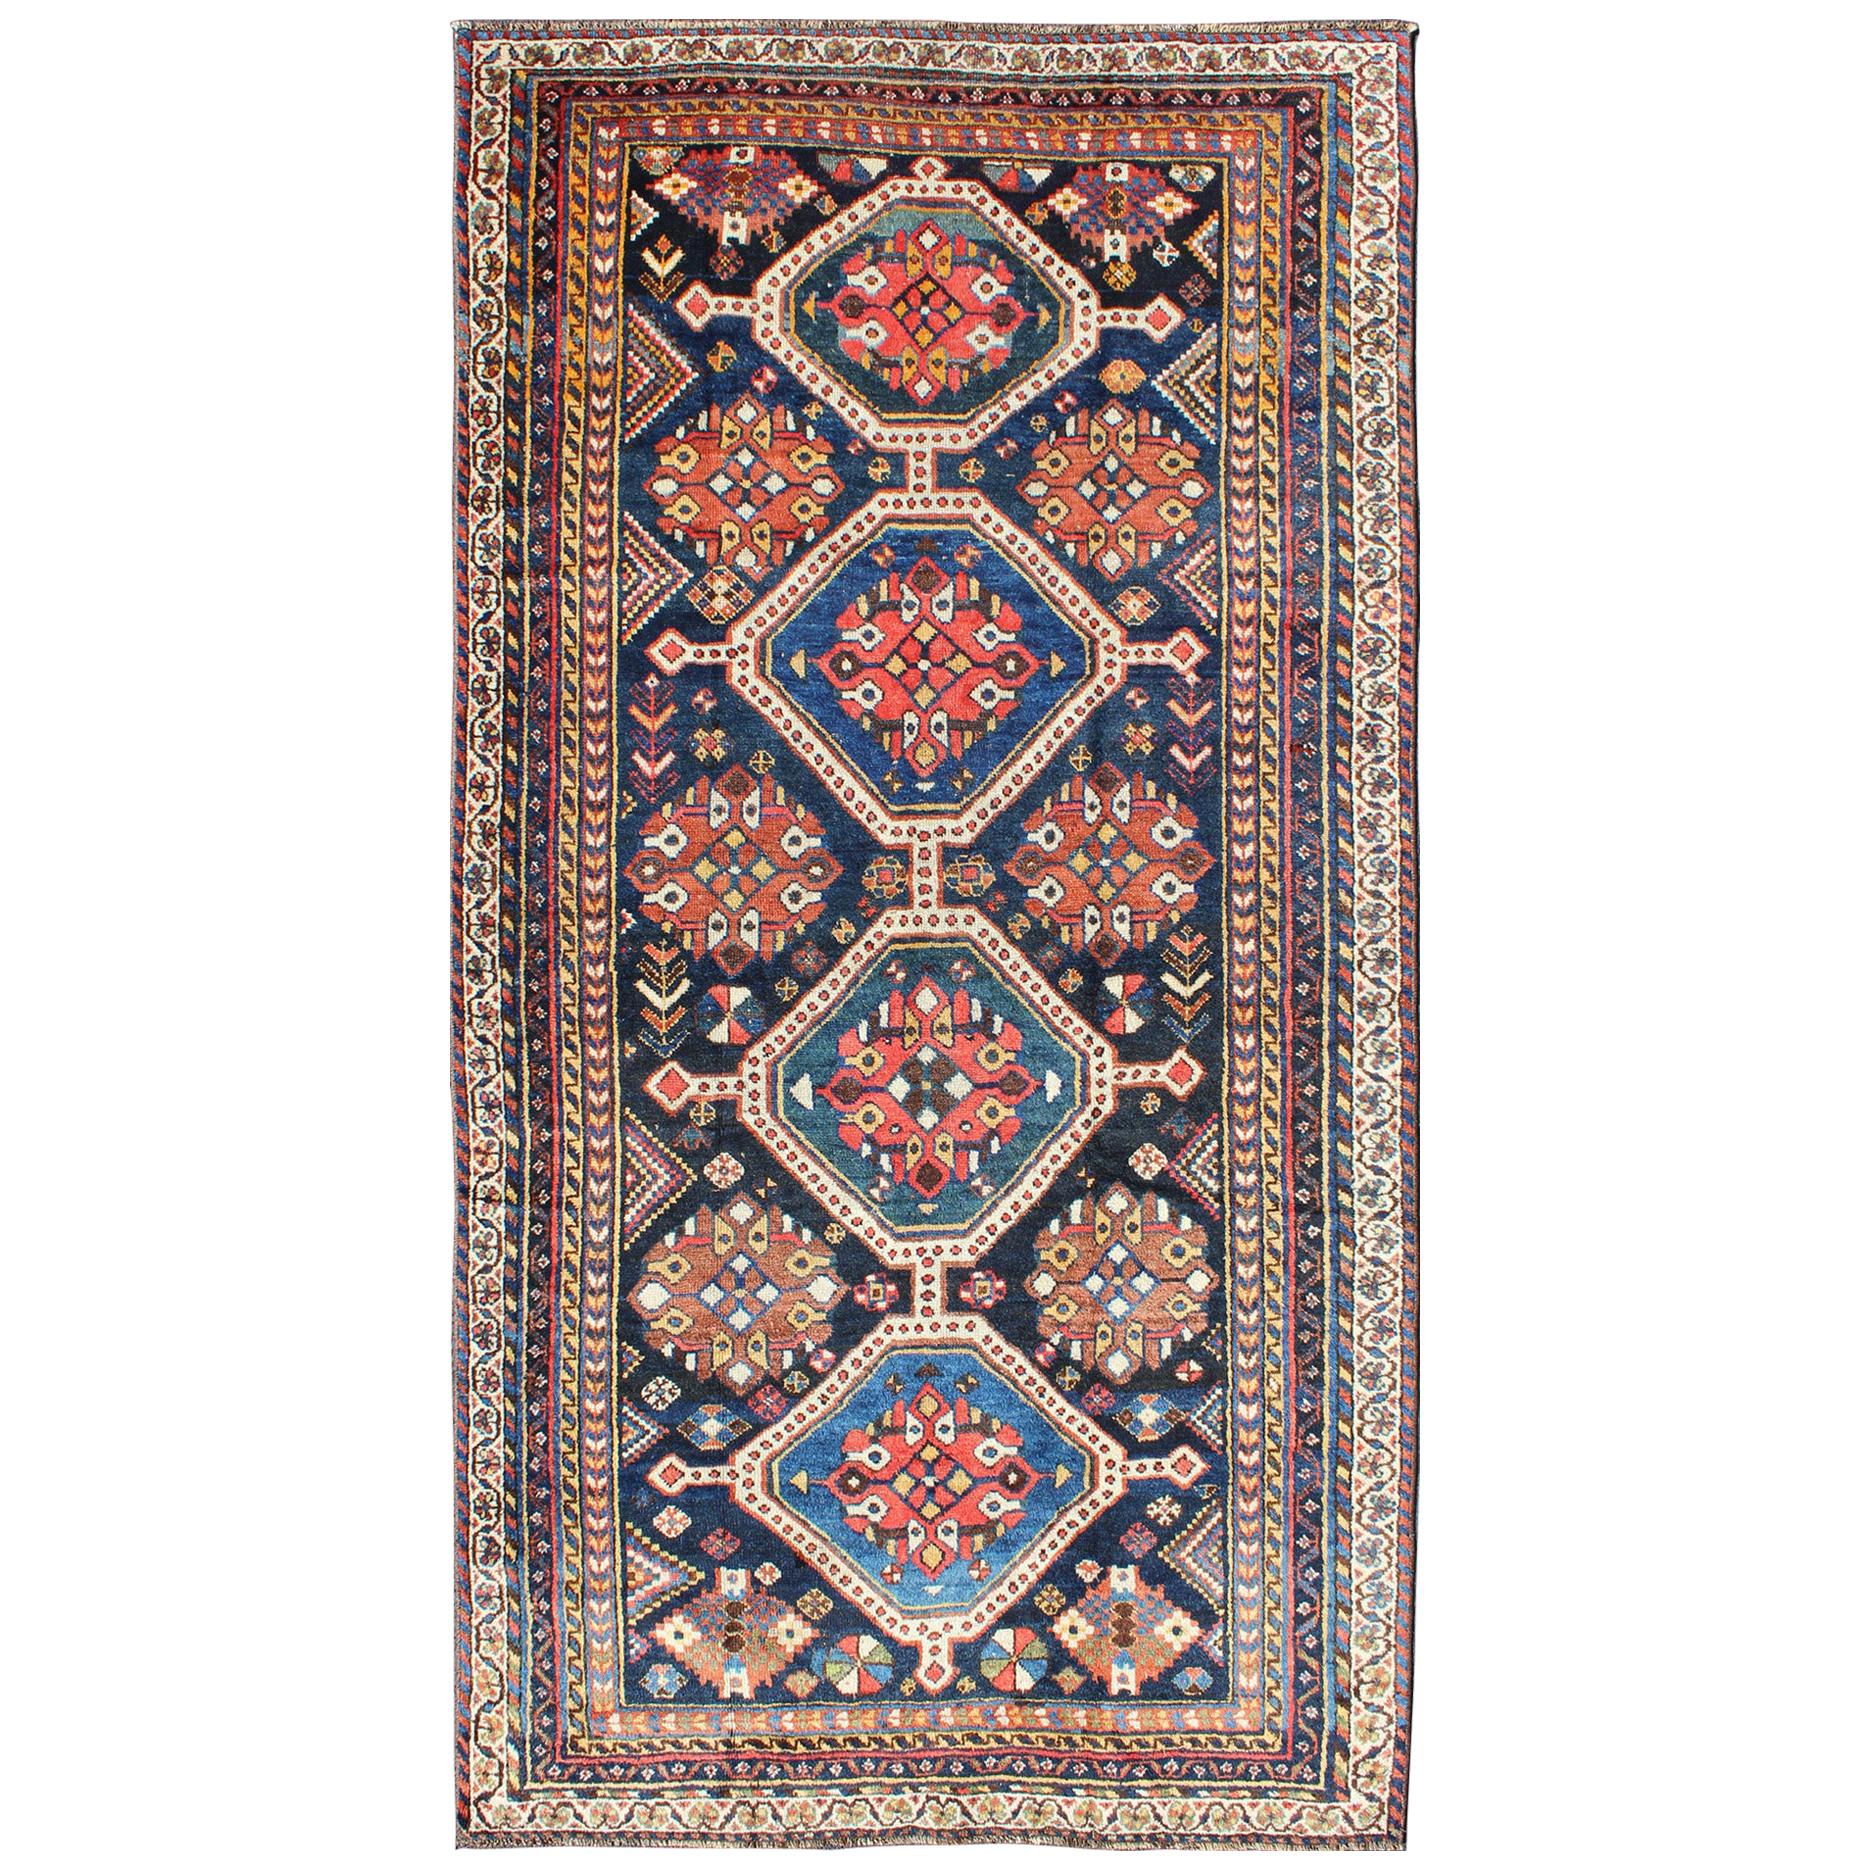 Antique Persian Qashqai Rug with Four-Medallion Design in Blue, Red, Brown Tones